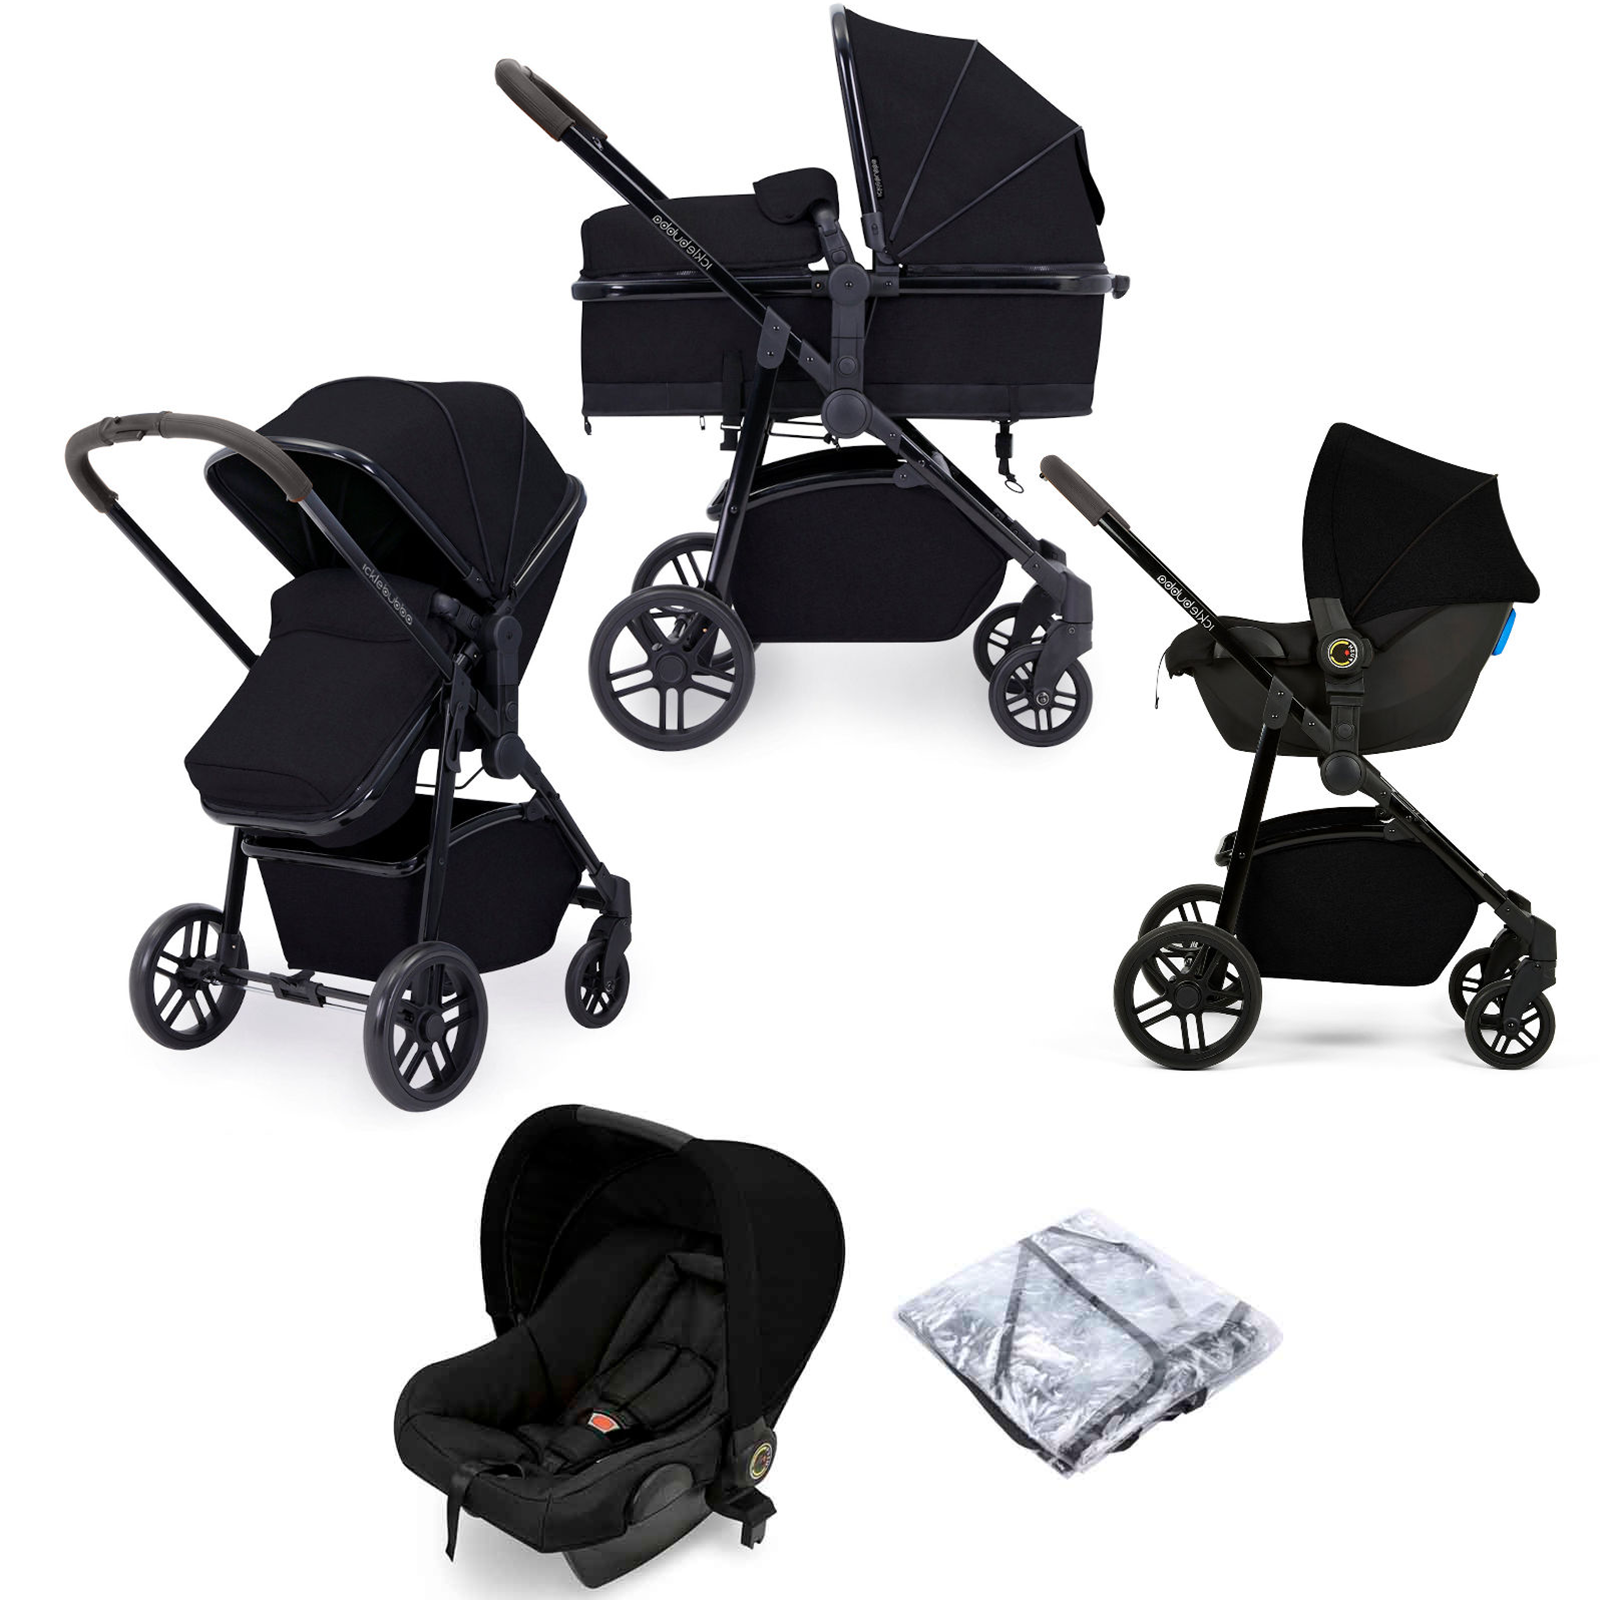 Ickle Bubba Zira Moon 3 in 1 (Astral) Travel System - Black 